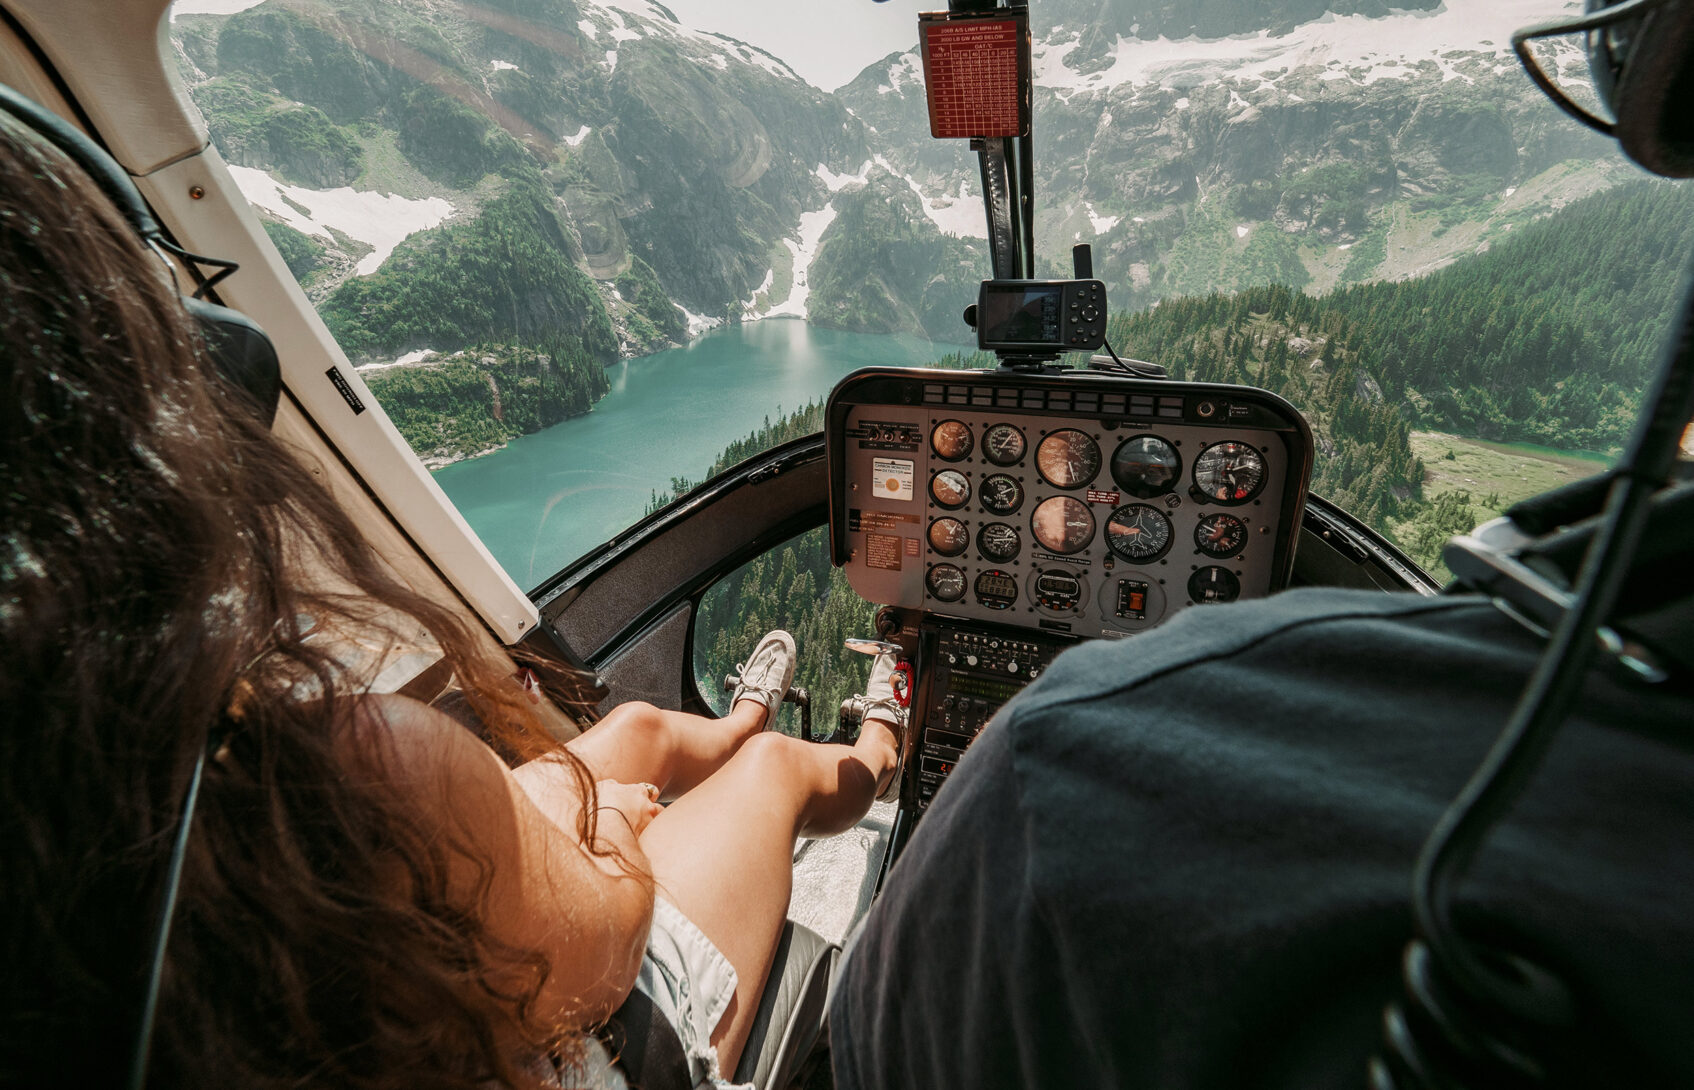 A person traveling in the cockpit of a helicopter sees mountains, waterfalls, and a lake below